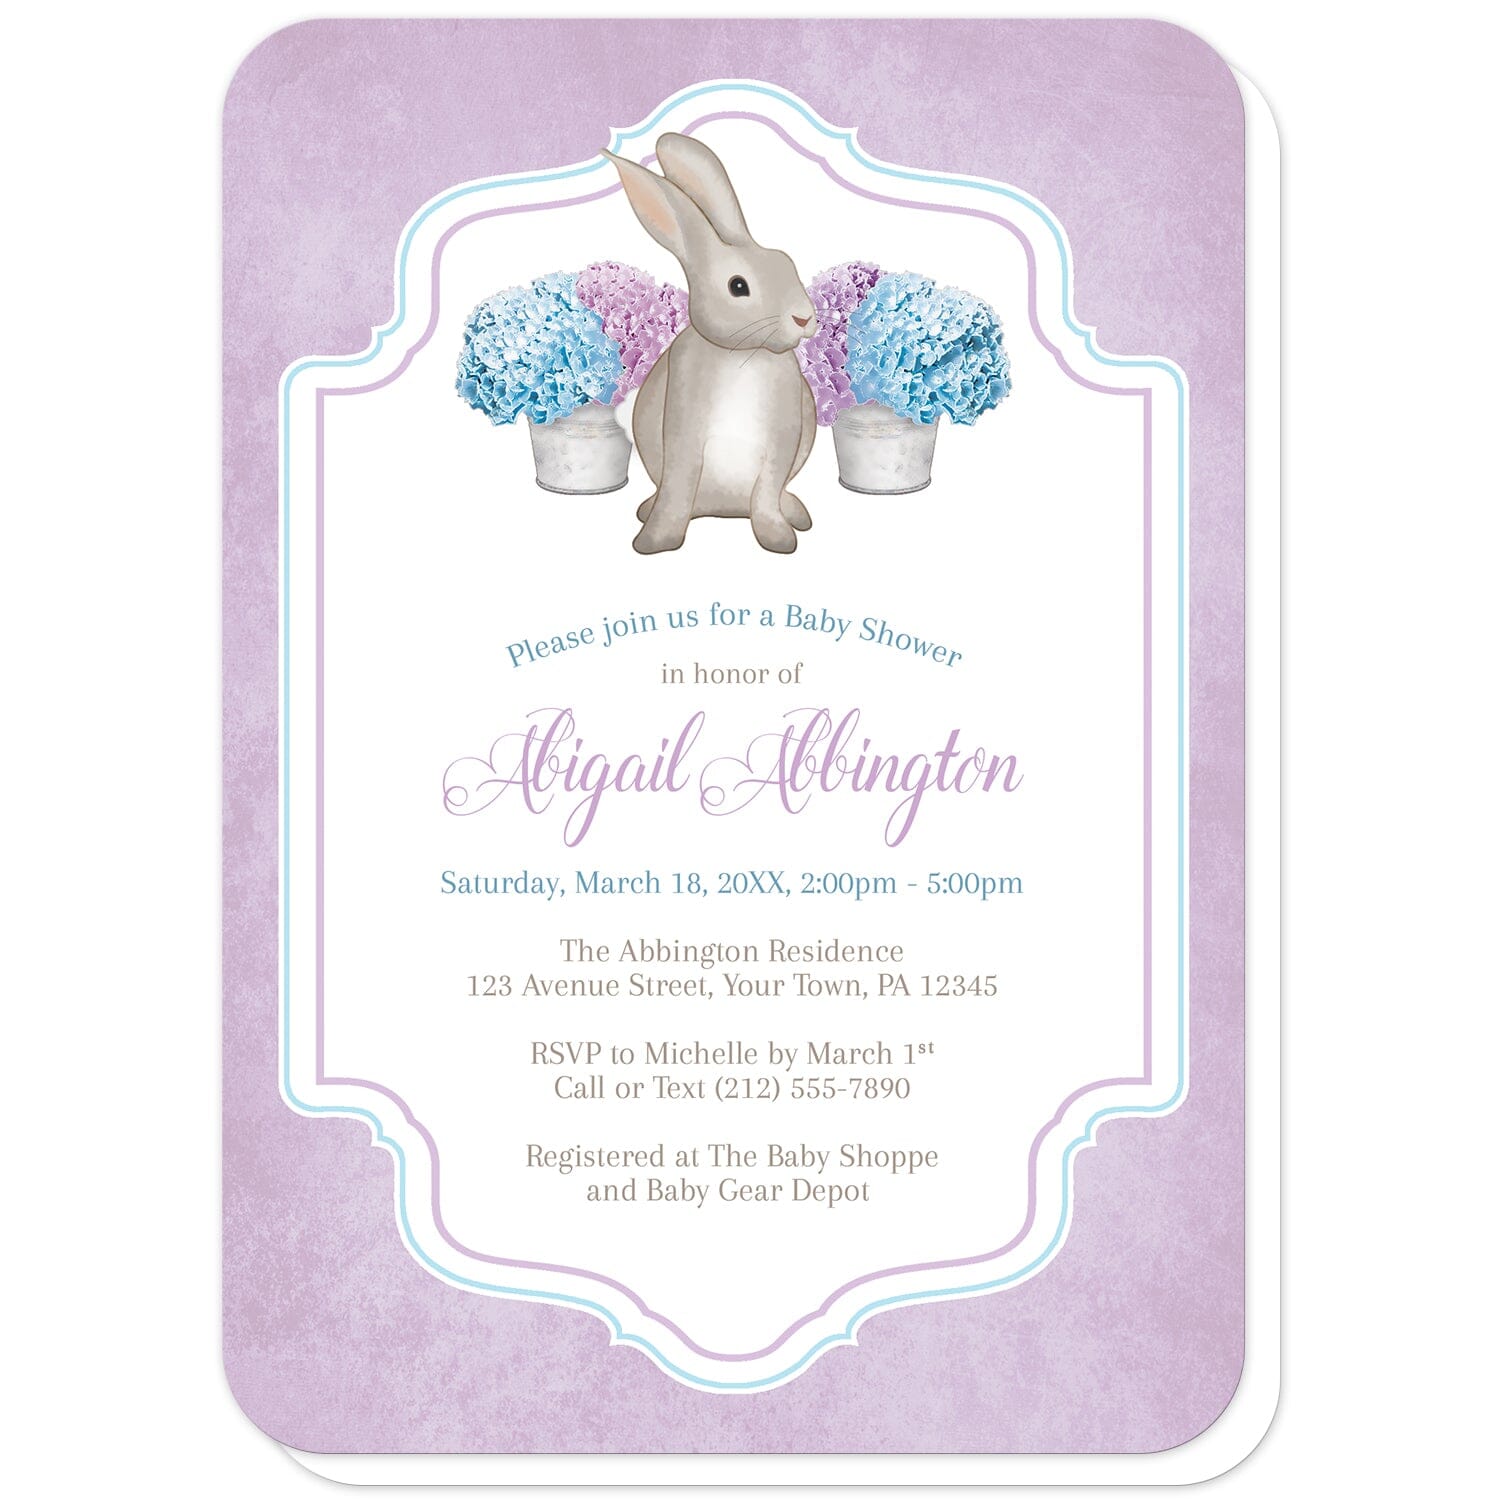 Purple Blue Hydrangea Rabbit Baby Shower Invitations (with rounded corners) at Artistically Invited. Purple blue hydrangea rabbit baby shower invitations with a watercolor-inspired illustration of cute little brown bunny rabbit with blue and purple hydrangea floral arrangements in tin buckets. Your personalized baby shower celebration details are custom printed in purple, blue, and brown in the white frame area outlined with blue and purple, over a light rustic purple colored background.